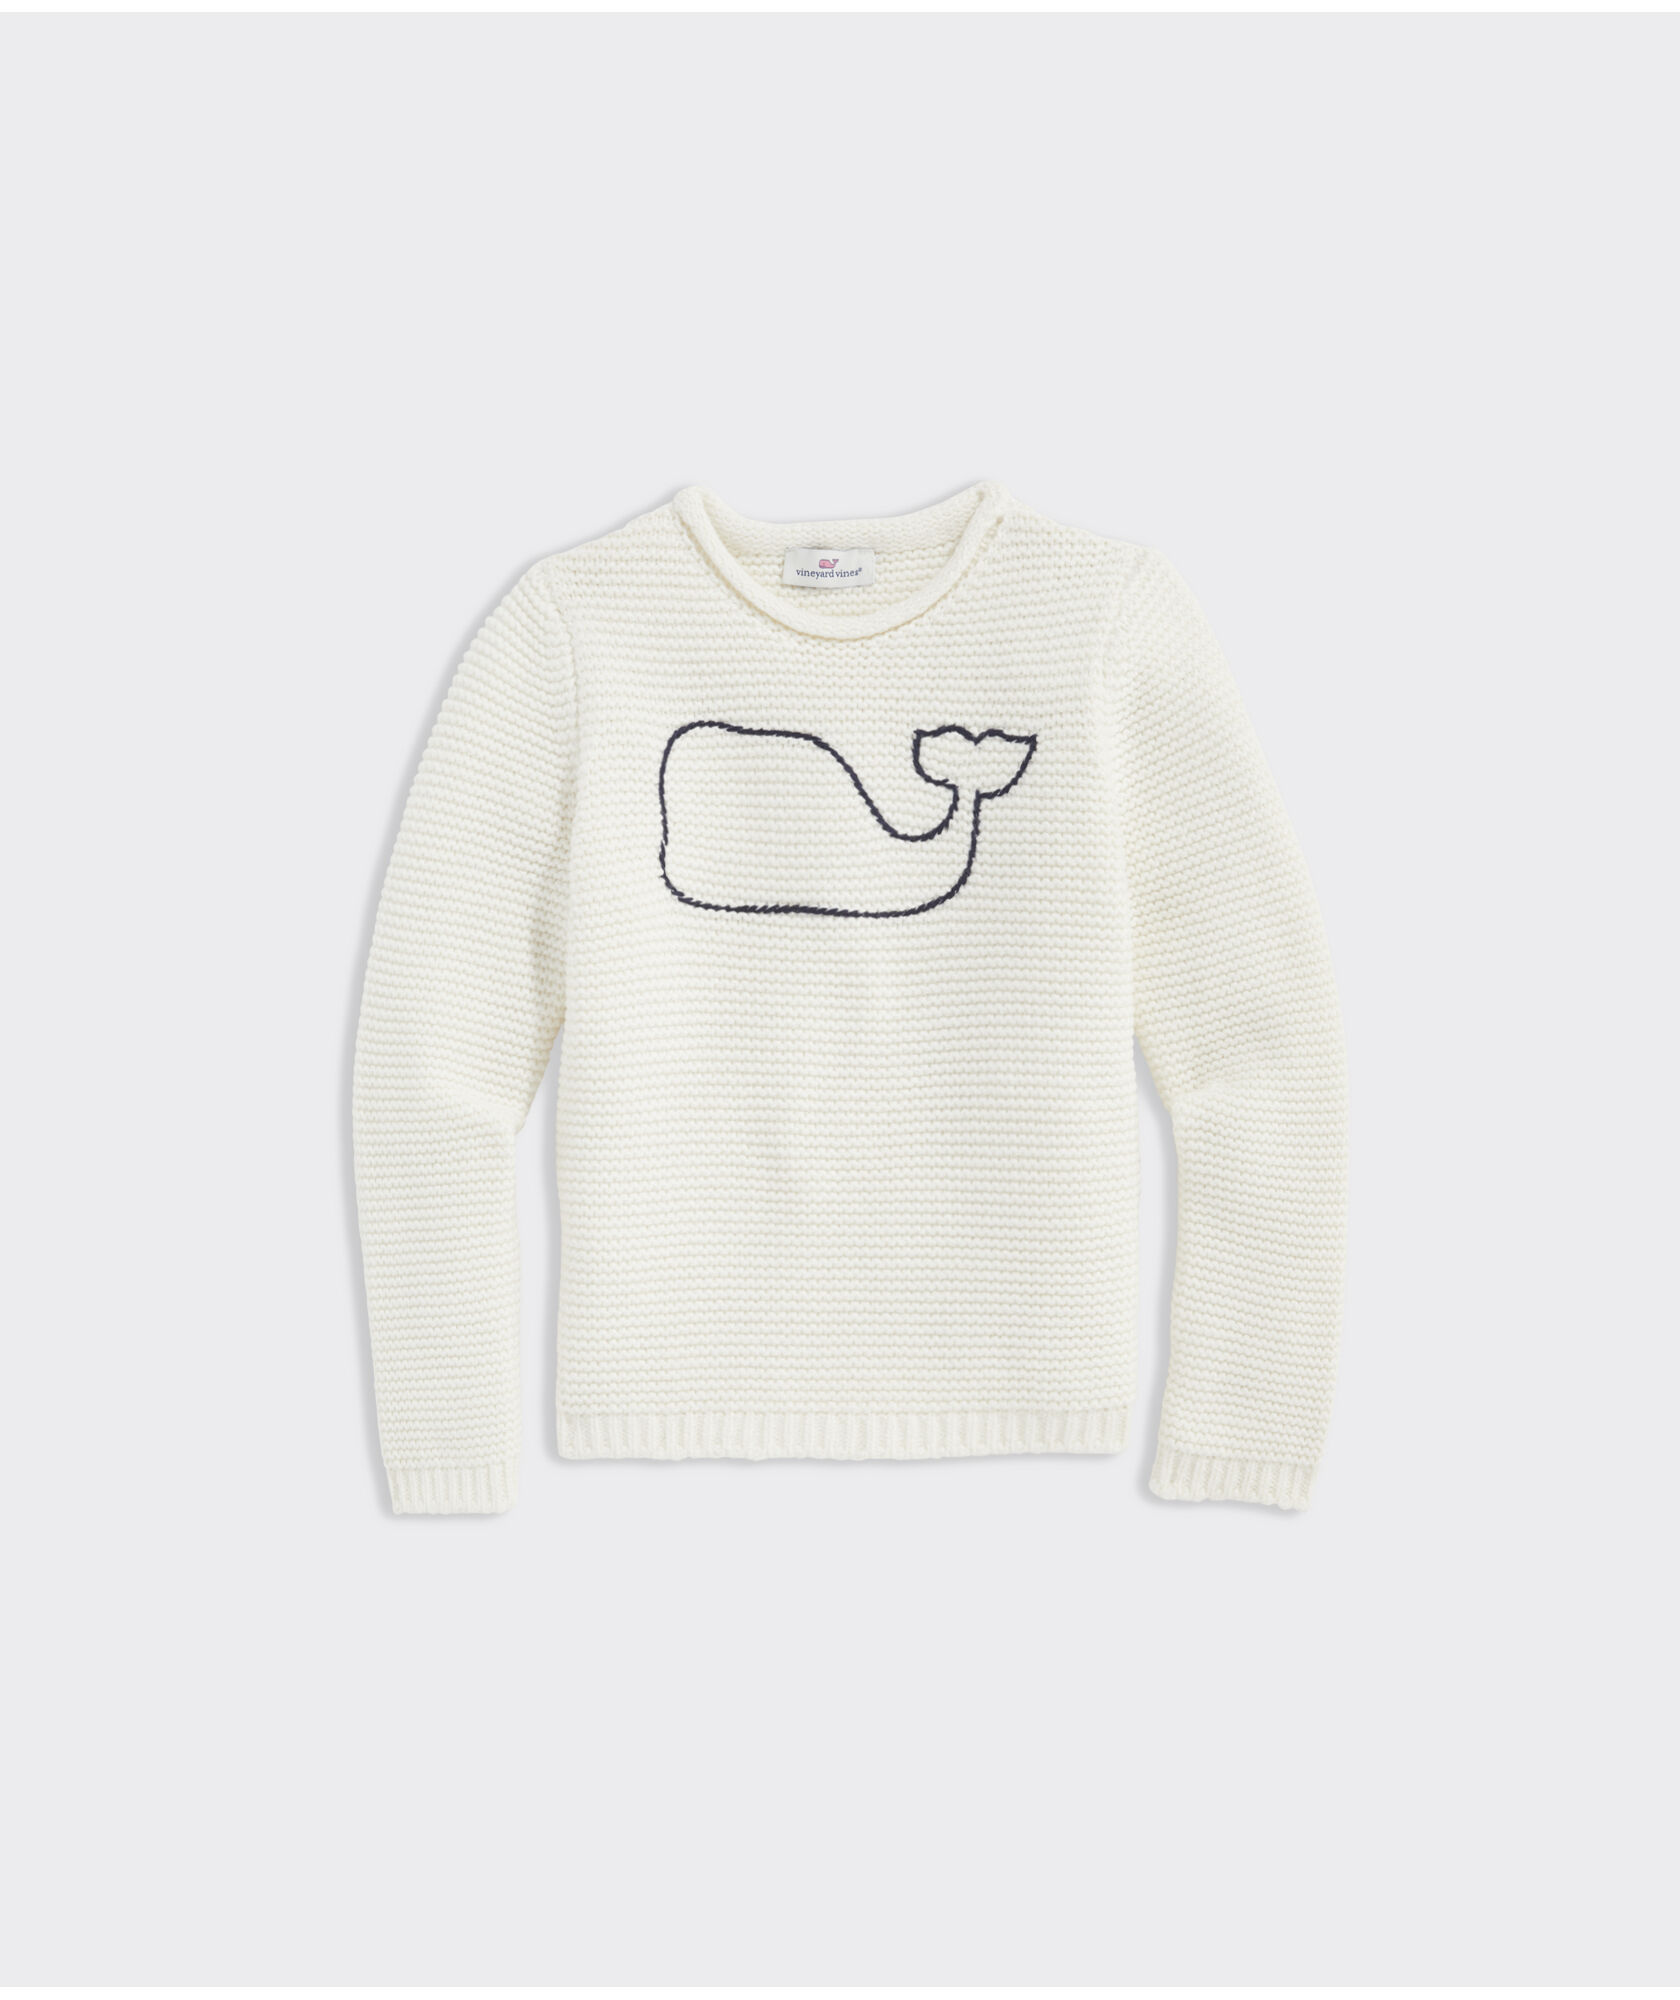 Girls' Embroidered Whale Rollneck Sweater